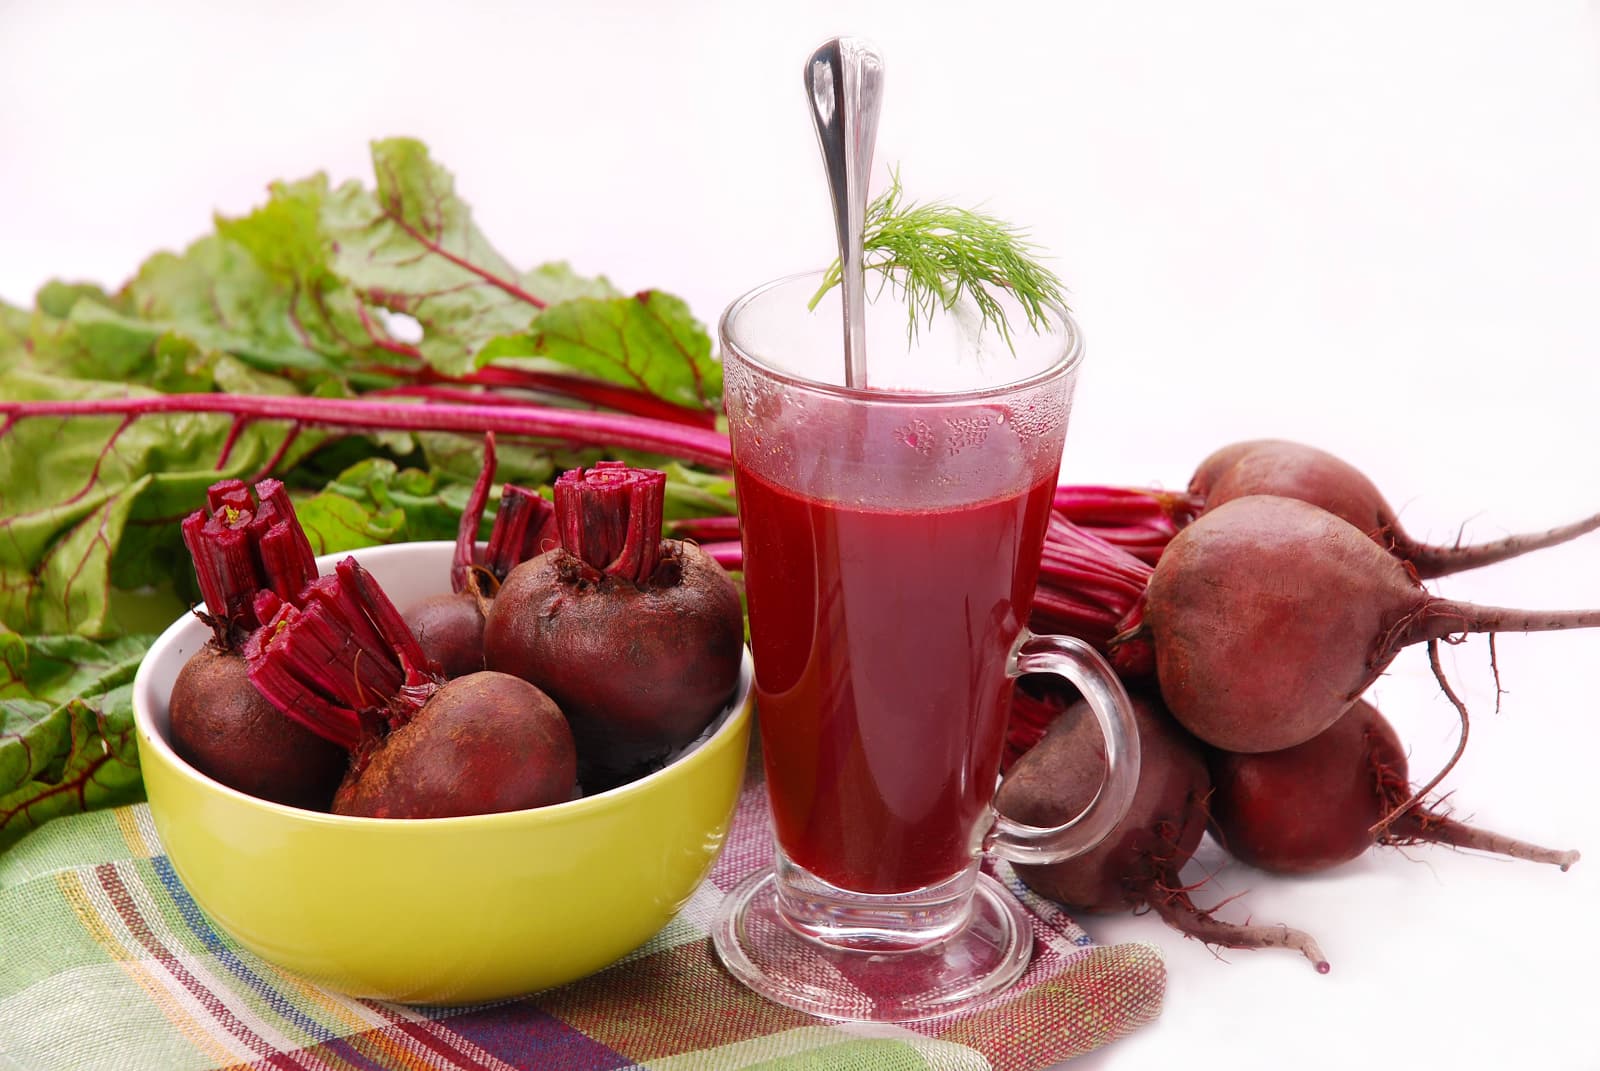 Here's why you should consume a glass of beetroot and carrot juice every day